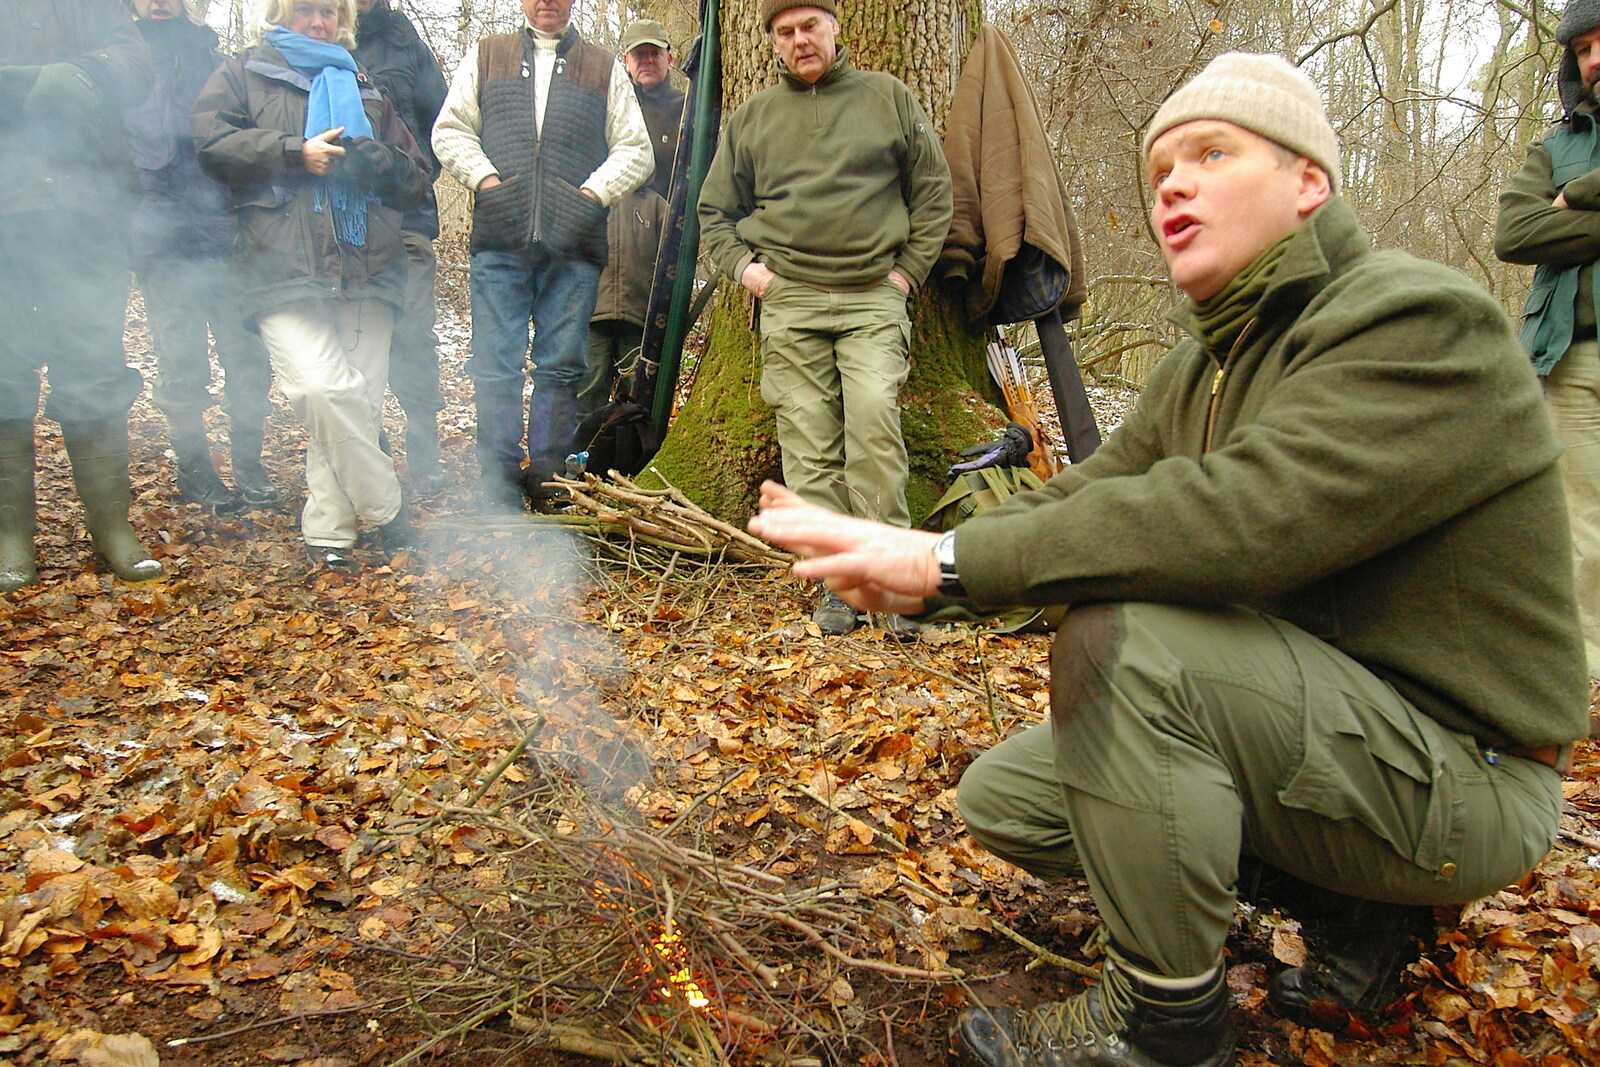 We get a lesson in fire lighting from Walk Like a Shadow: A Day With Ray Mears, Ashdown Forest, East Sussex - 29th December 2005